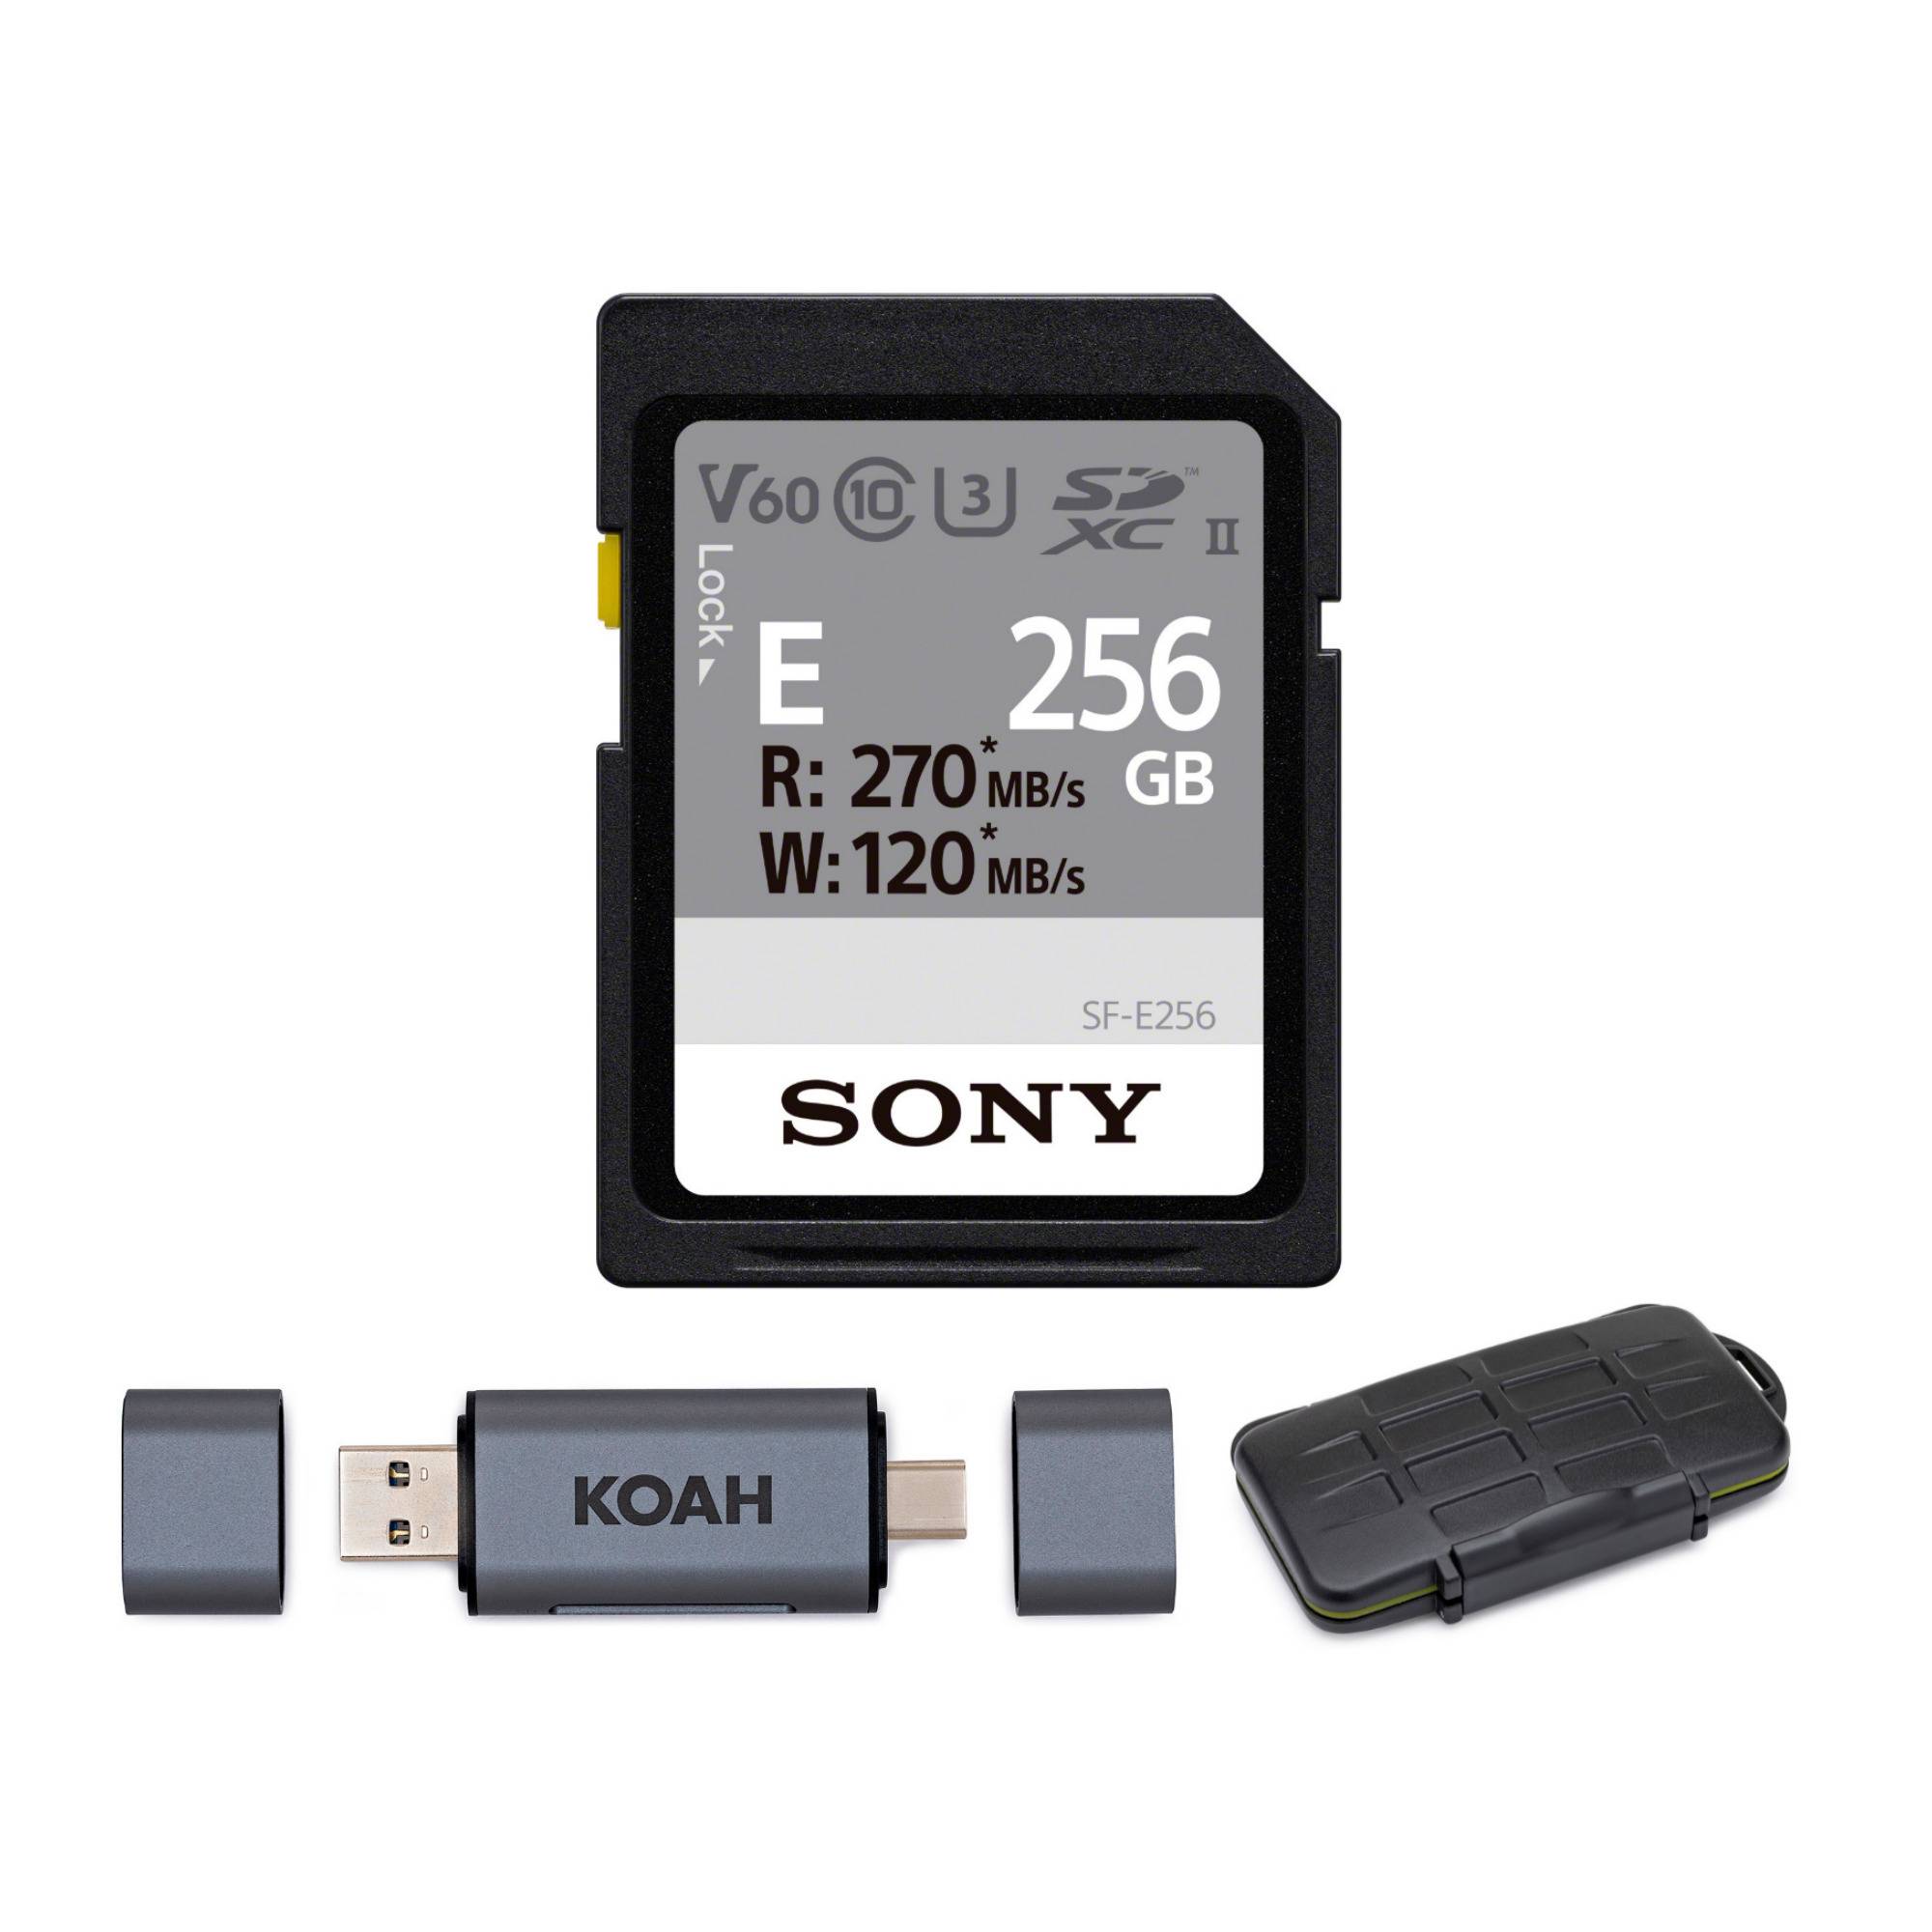 Sony 256GB E-Series High Speed SD Card with Koah Pro Card Reader and Rugged Memory Card Storage Case